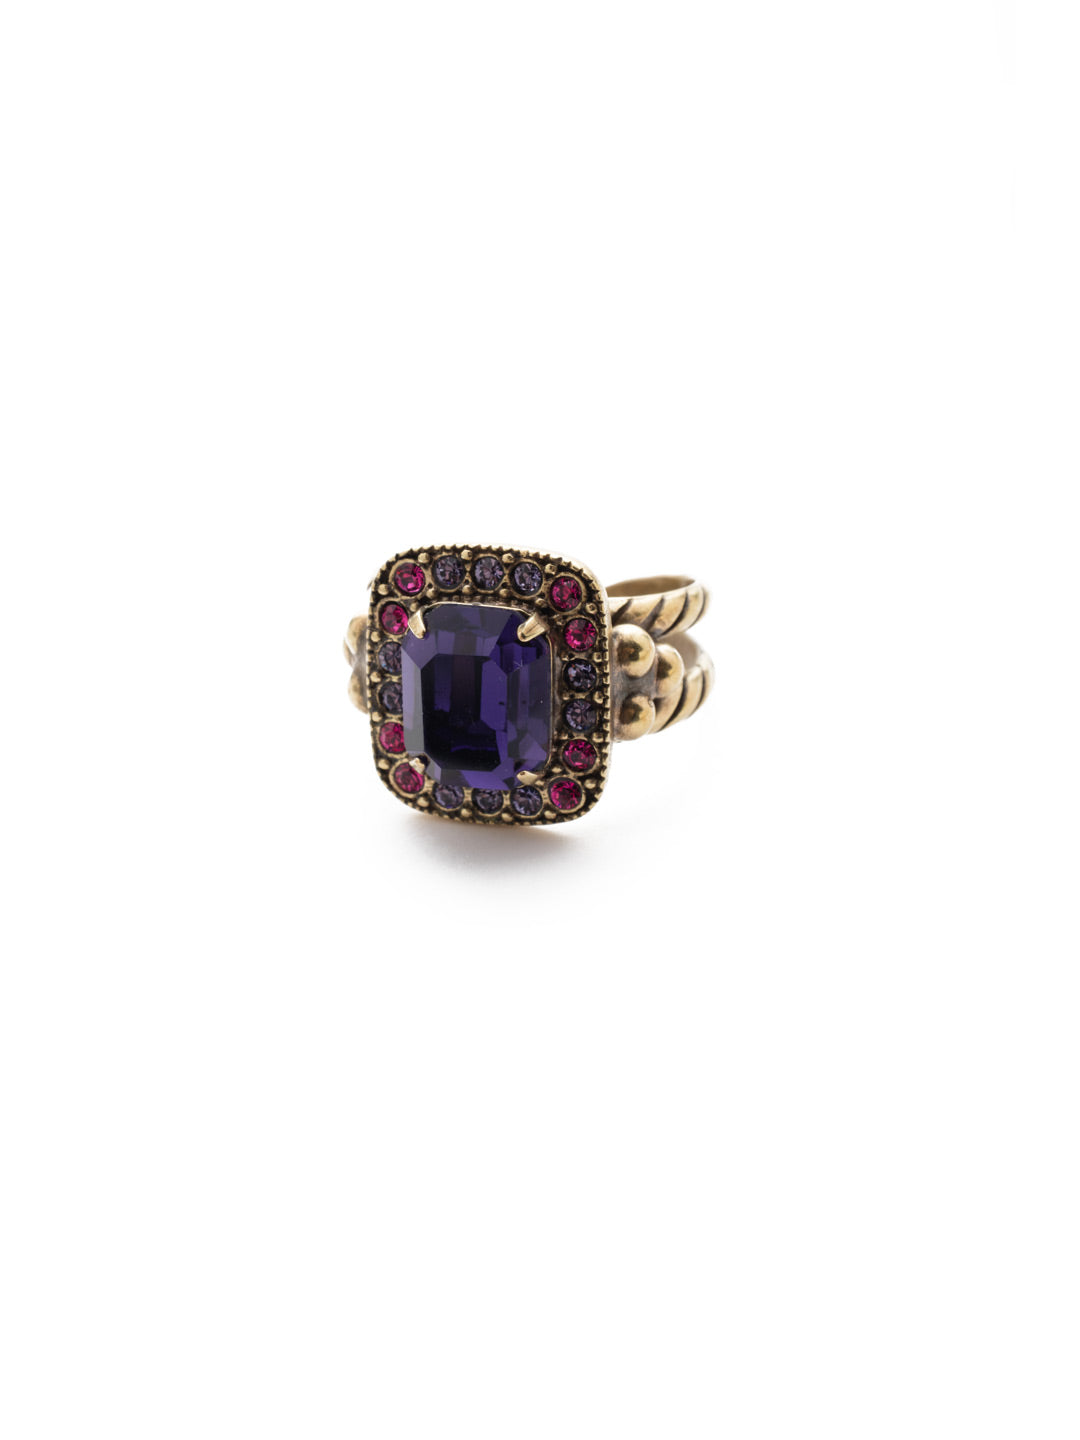 Opulent Octagon Cocktail Ring - RDQ41AGDCS